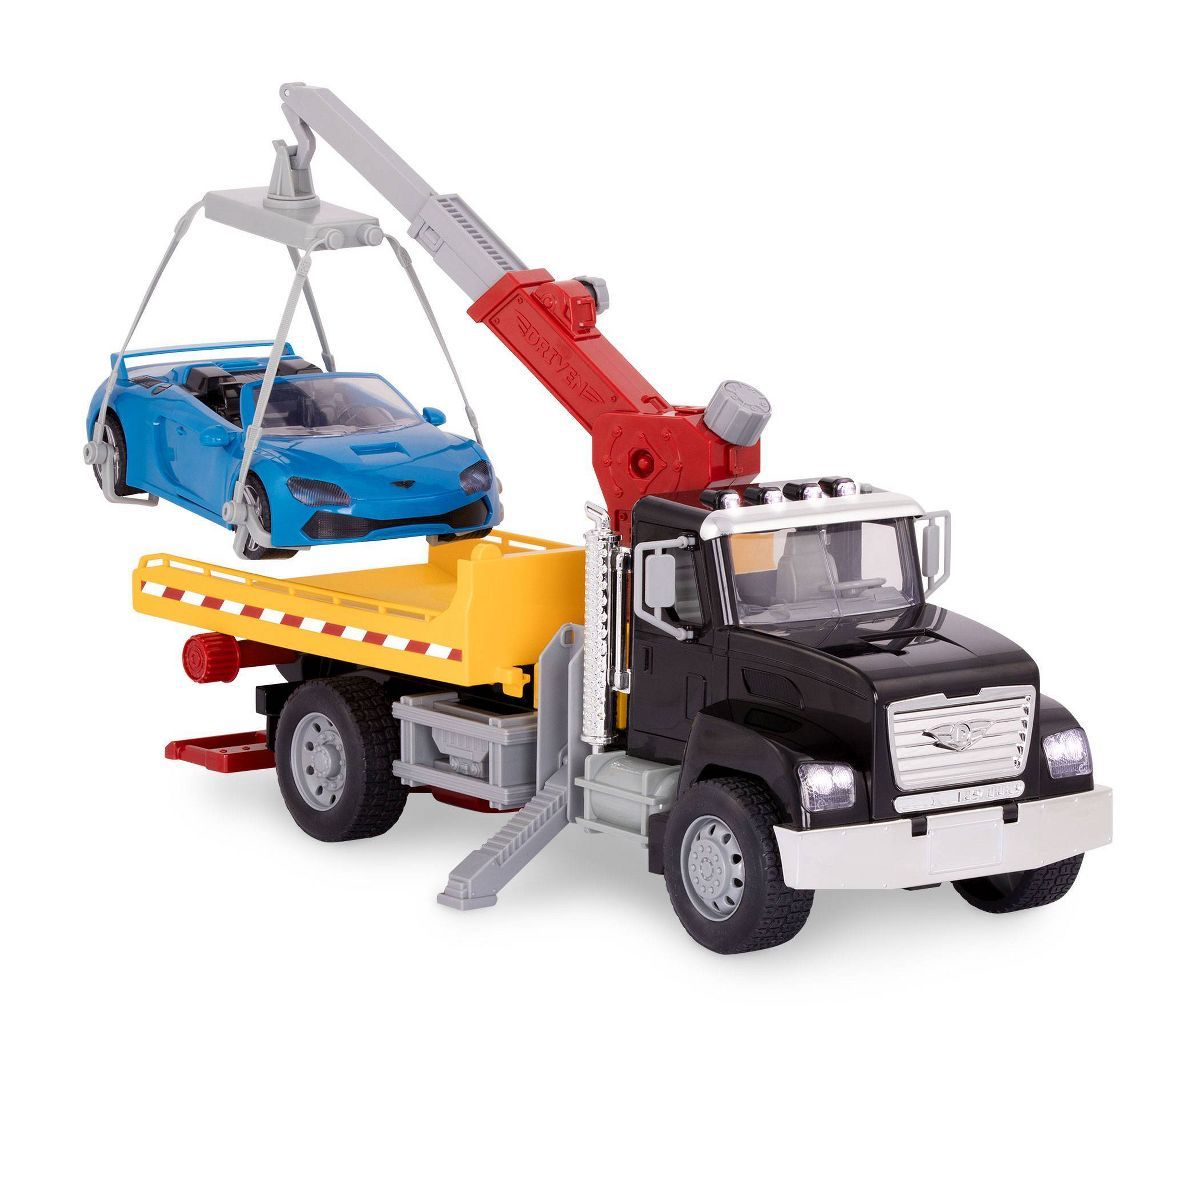 DRIVEN by Battat – Large Toy Truck with Car and Crane Arm – Tow Truck | Target